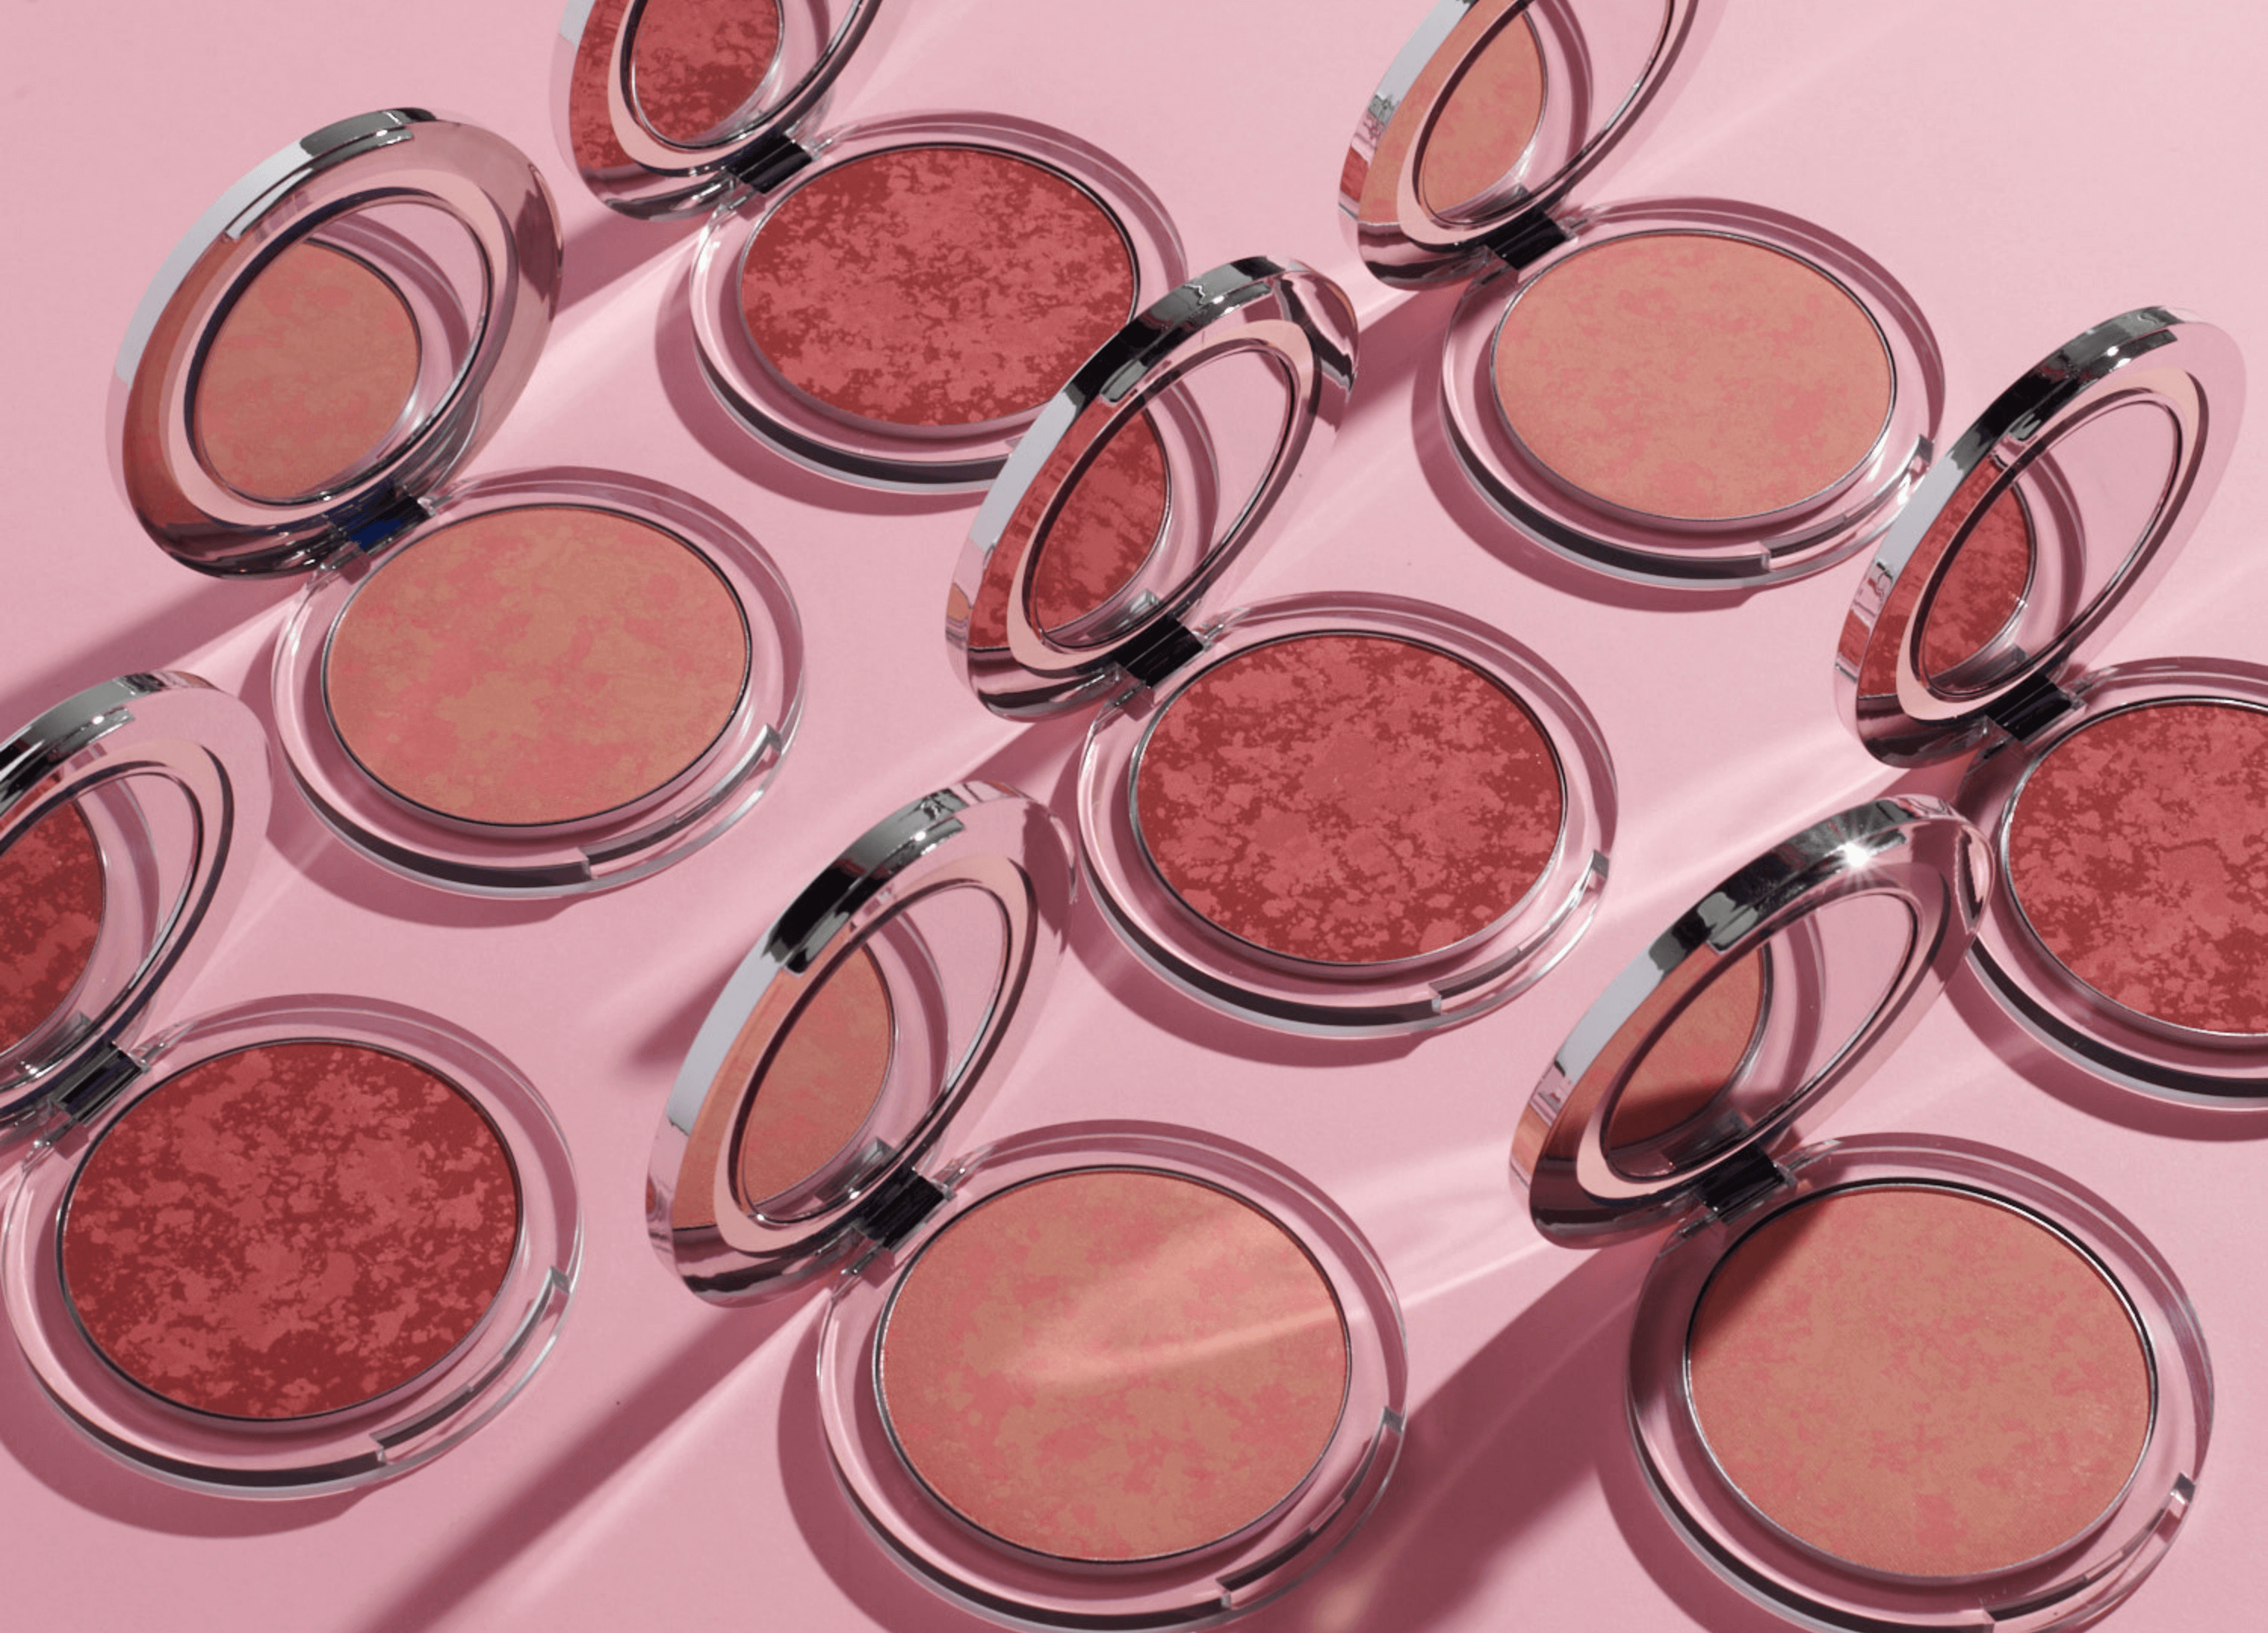 Skin Perfecting Powder Blushing Act in Pretty in Peach (Light)